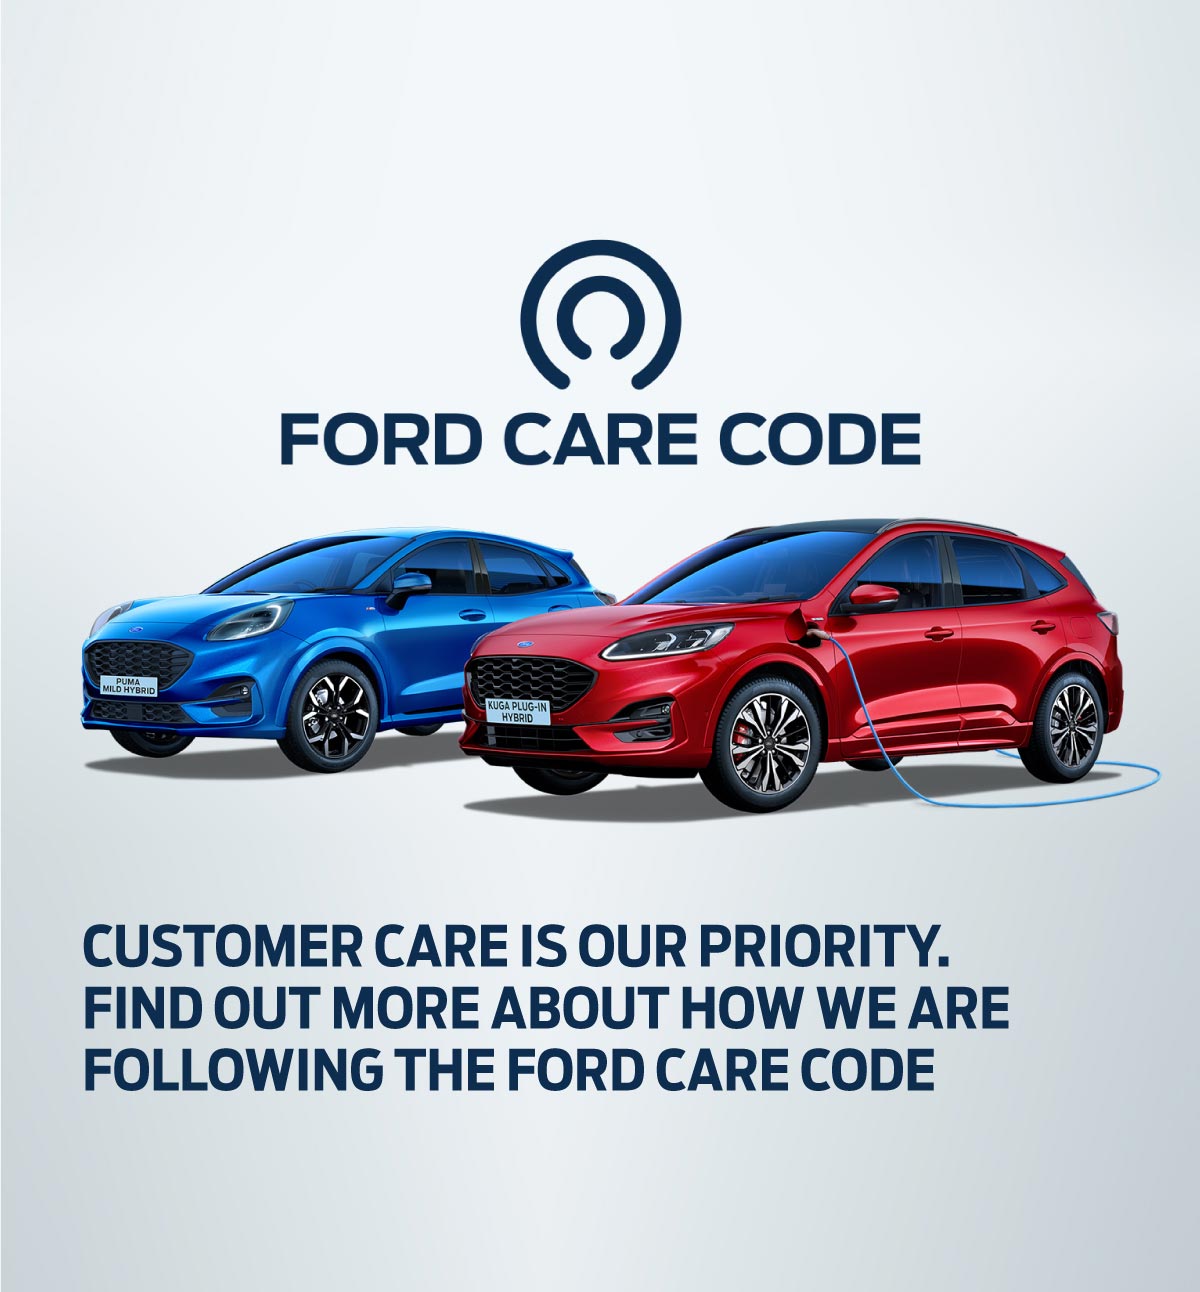 Ford Care Code 120122